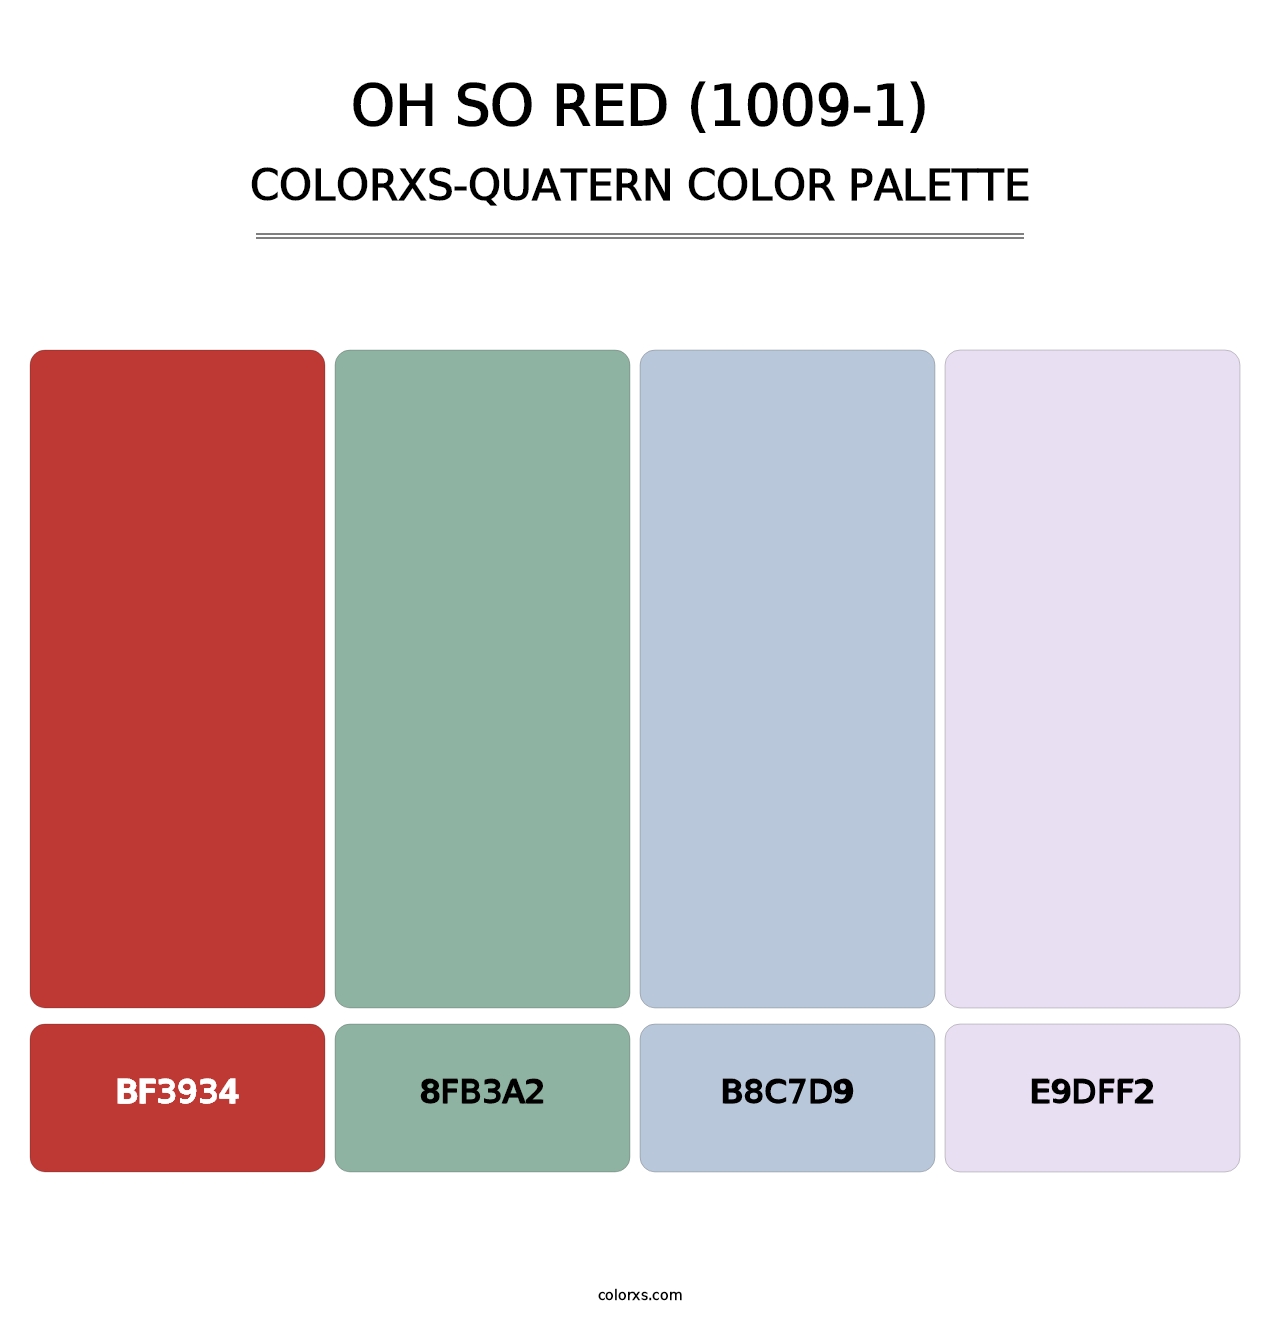 Oh So Red (1009-1) - Colorxs Quatern Palette